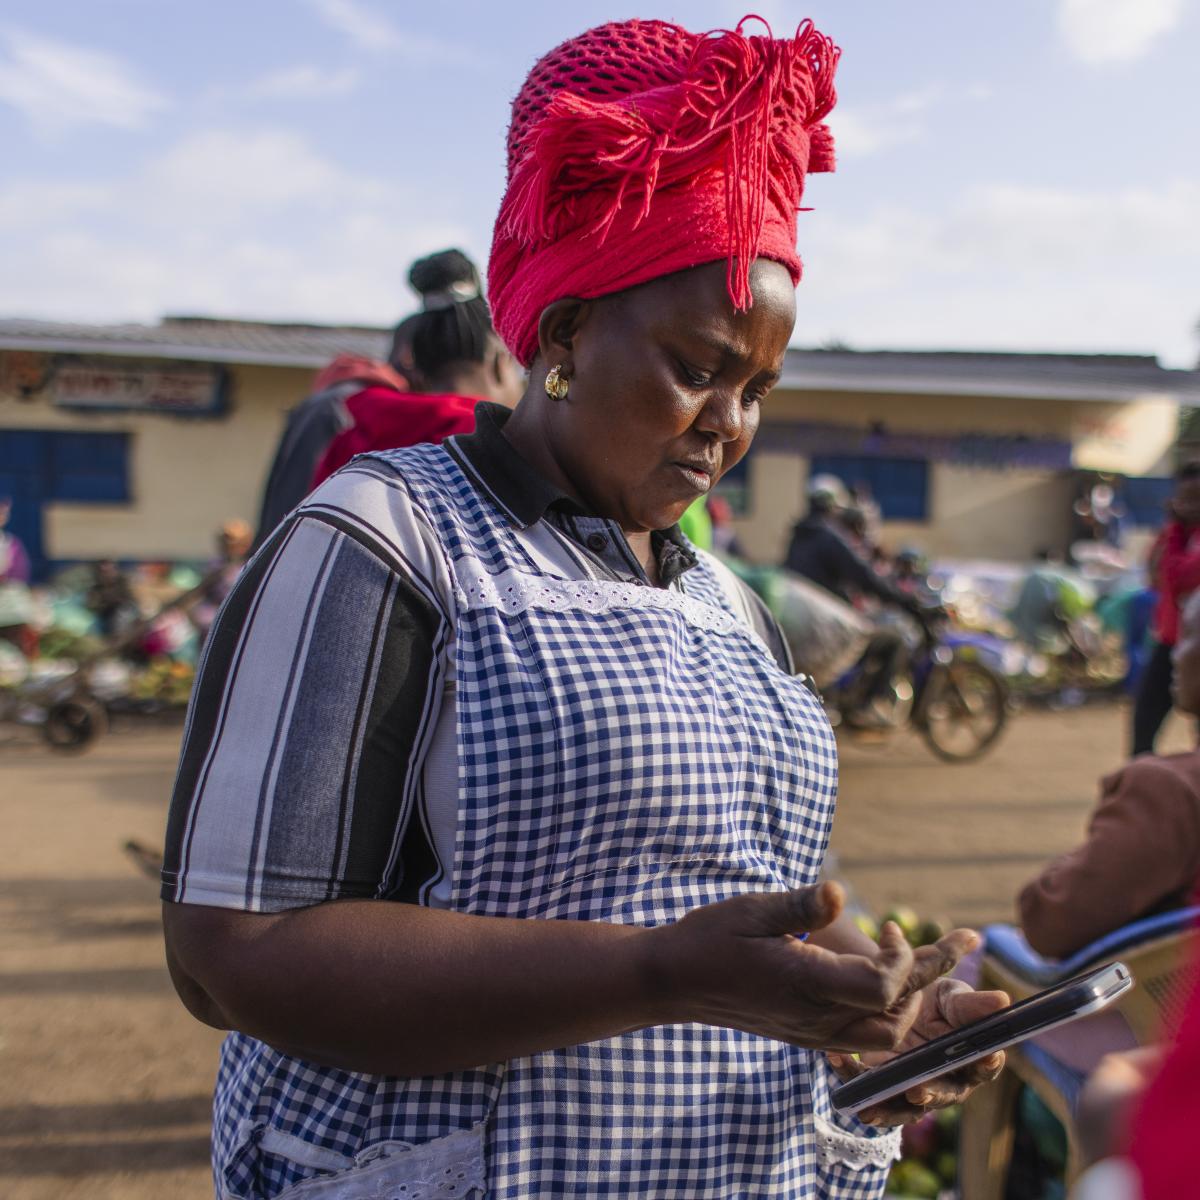 A woman looks down at her smartphone while standing in a busy market.